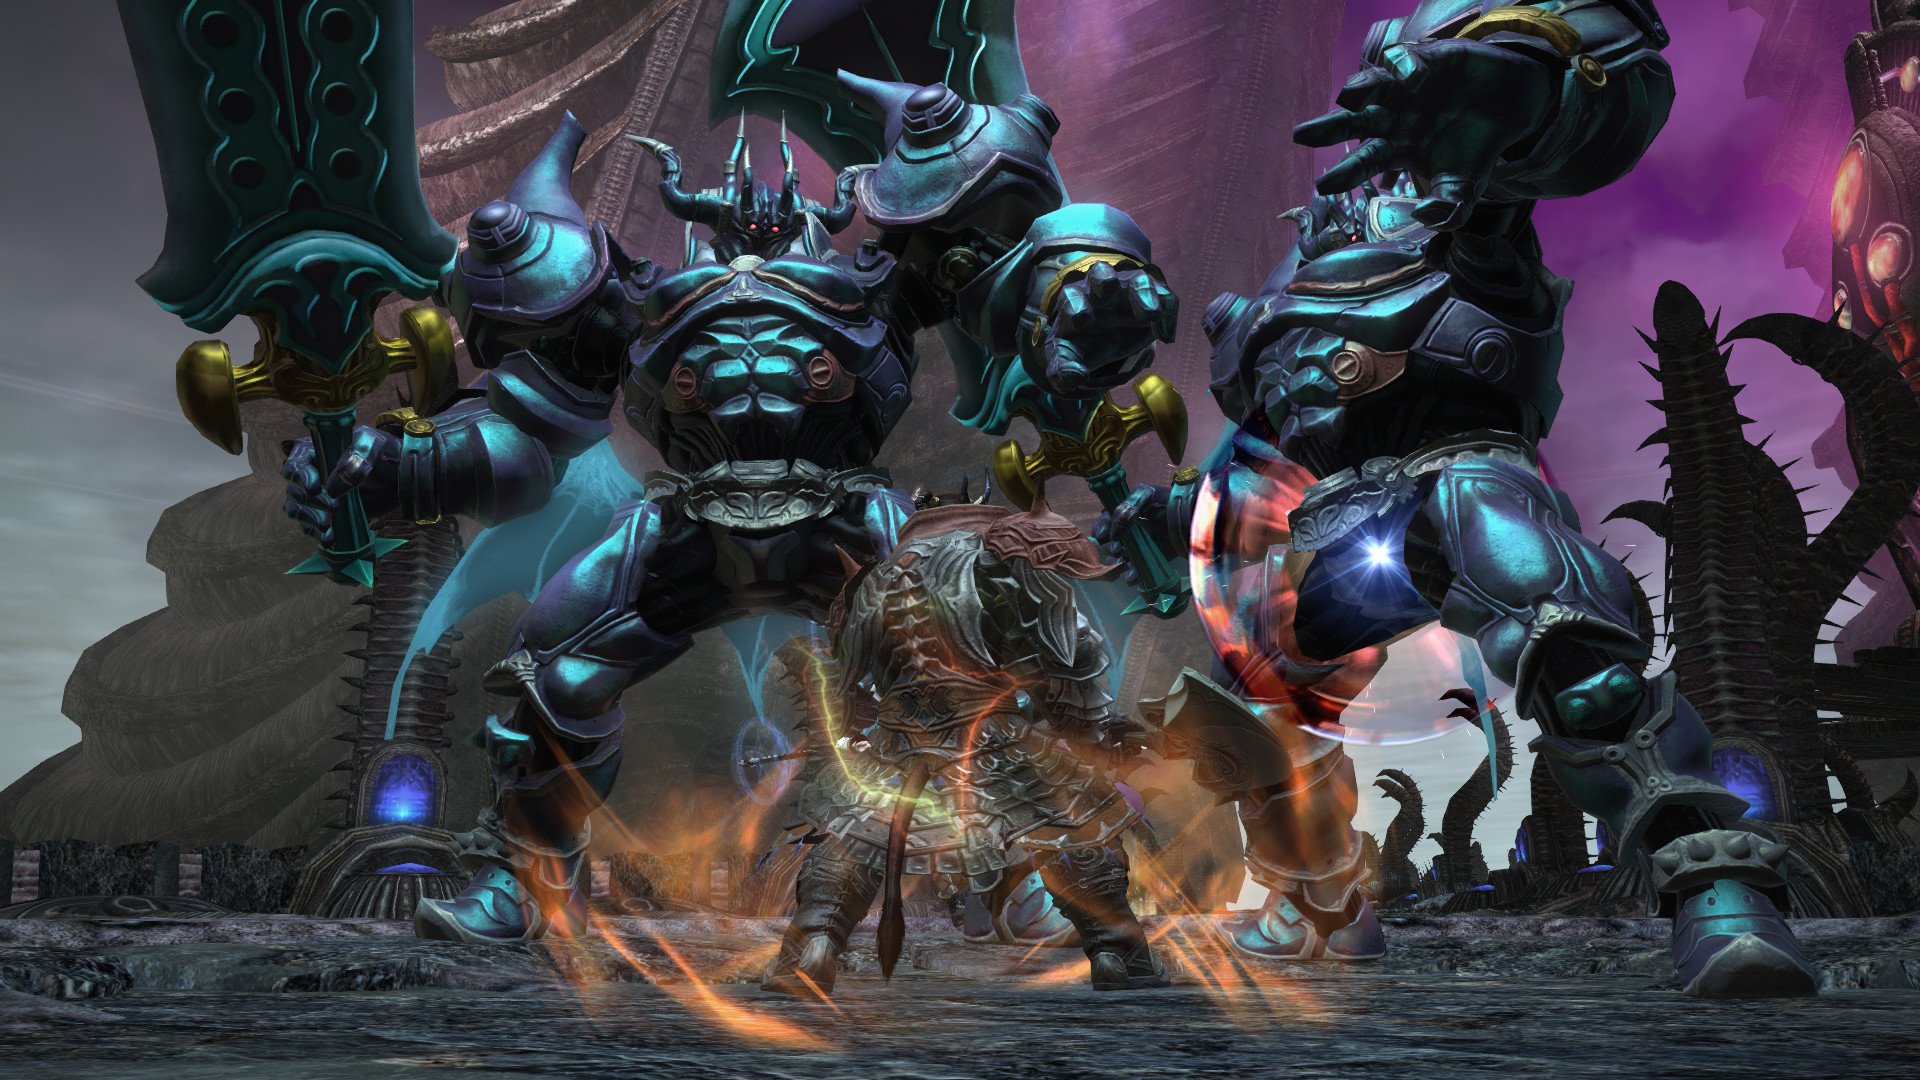 Final Fantasy 14 digital sales resume with new servers going